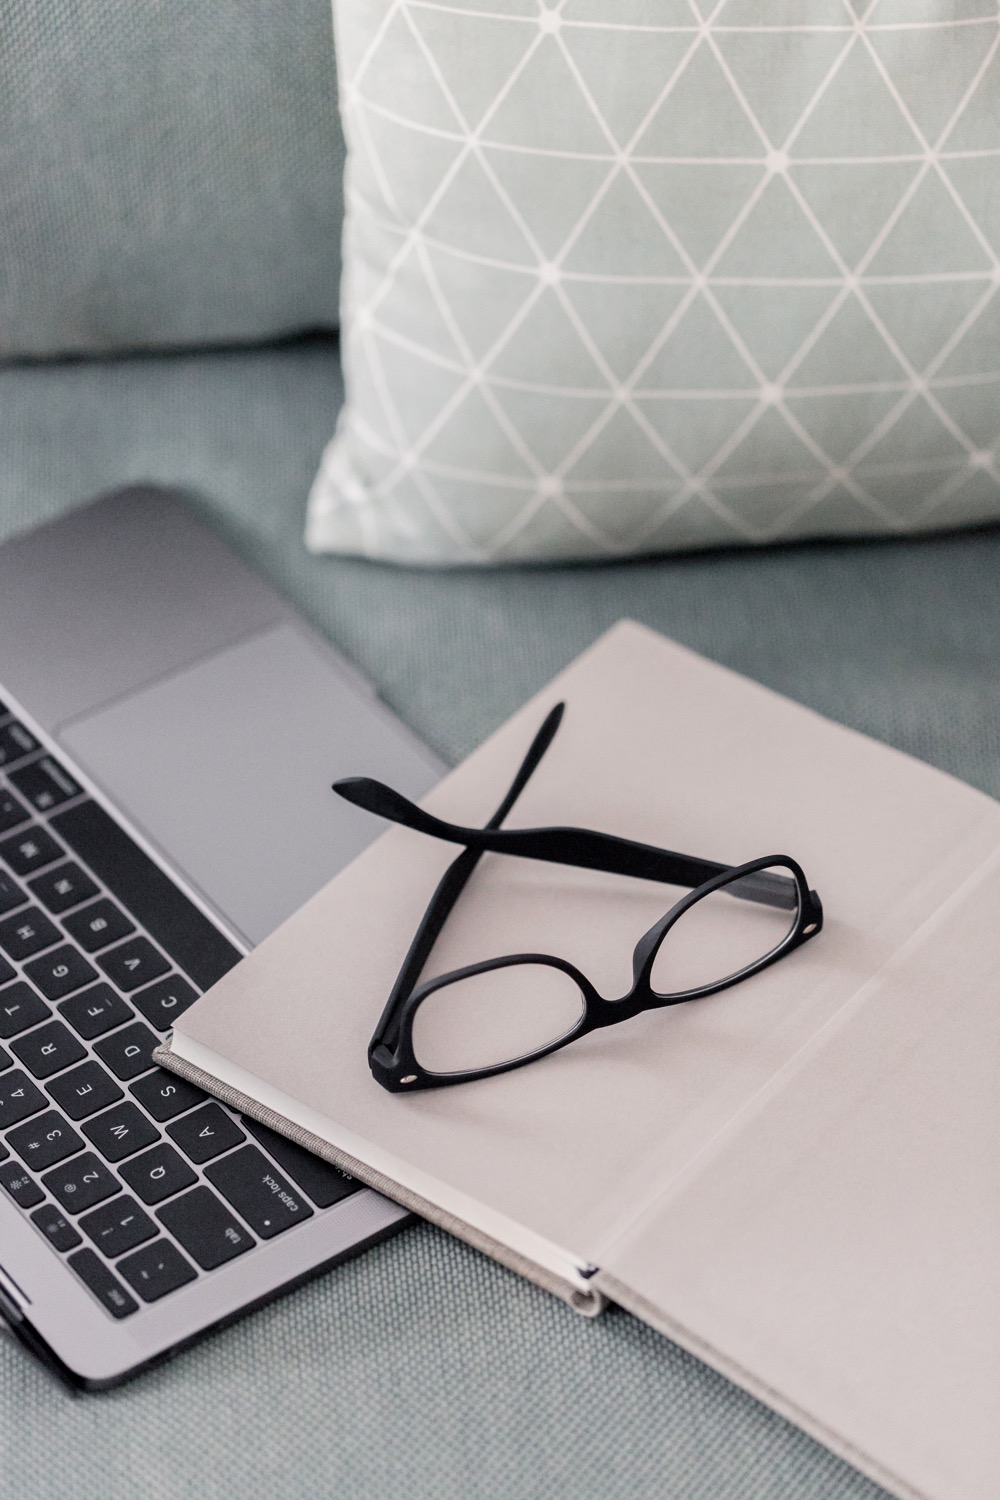 A pair of eyeglasses sitting on top of a notebook and a Macbook laid on a gray couch with a baby blue throw pillow